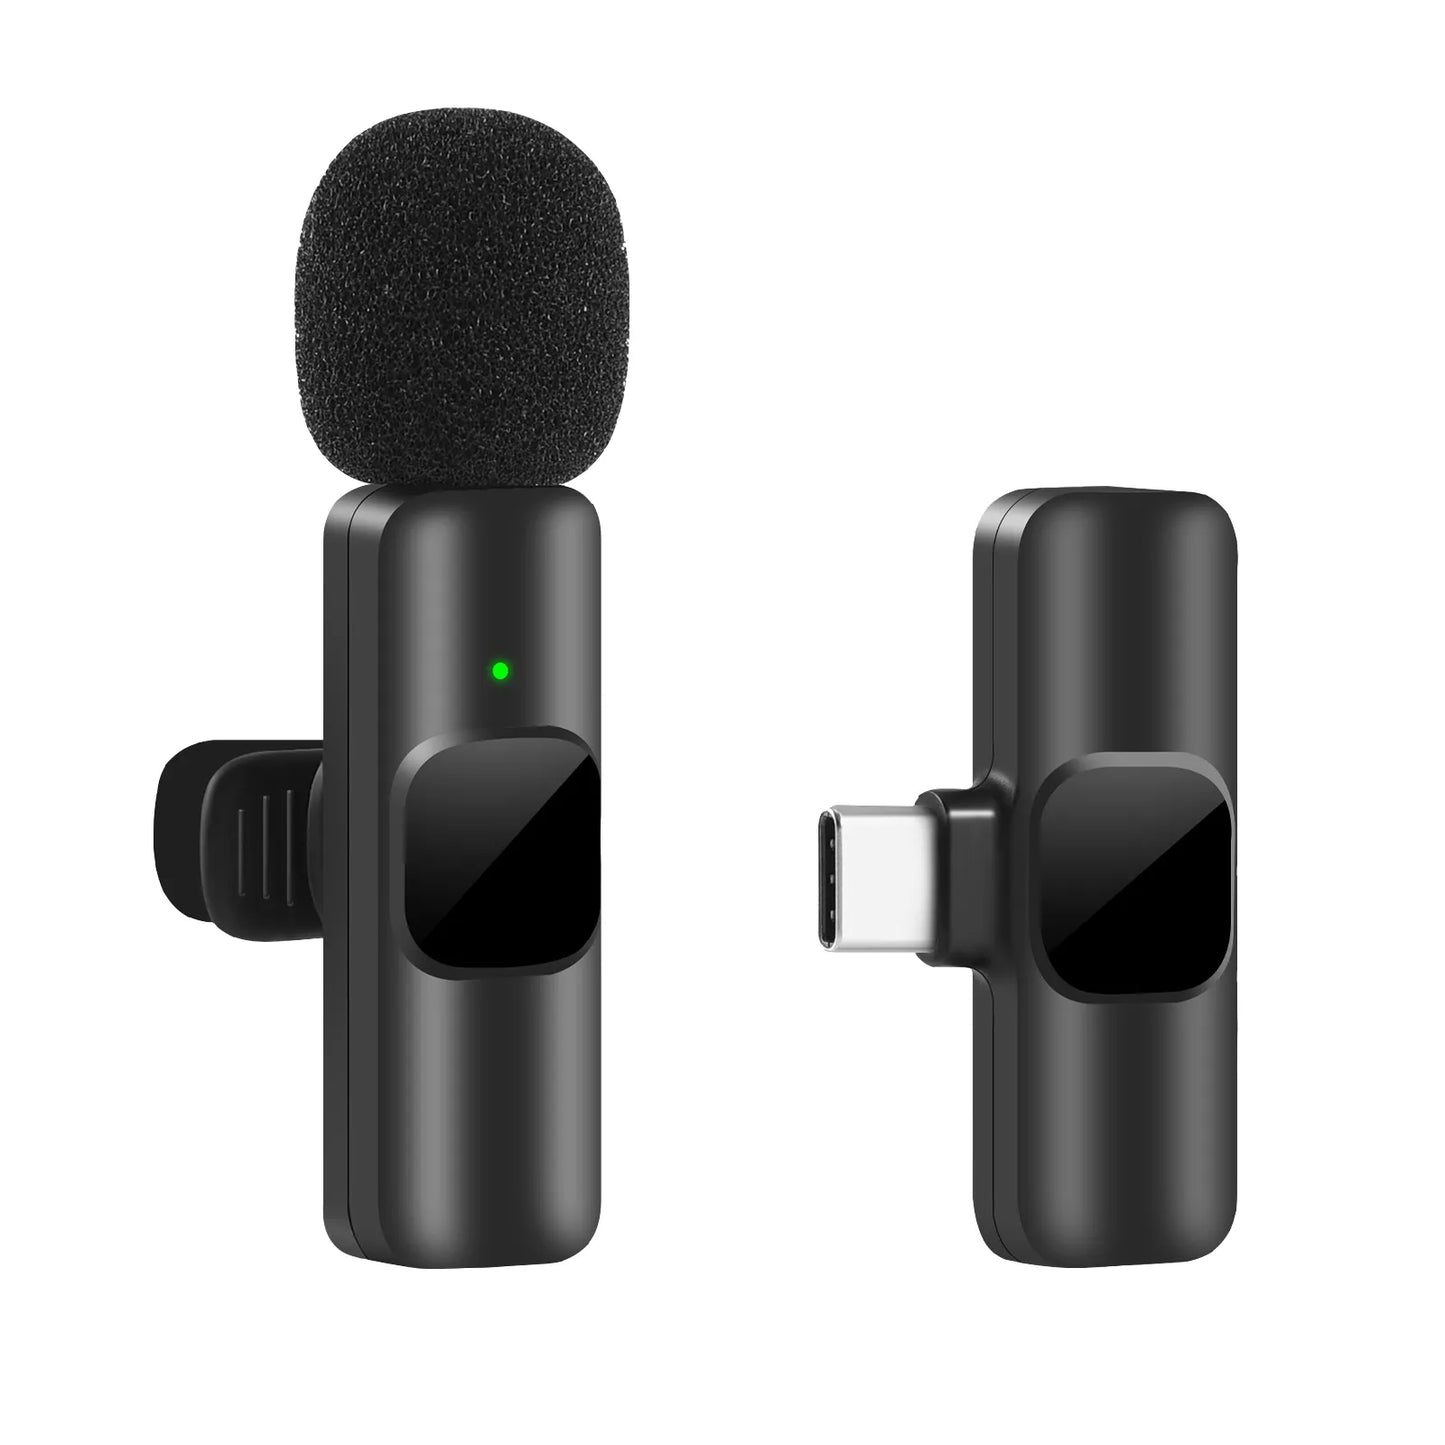 Wireless Lavalier Microphone: Portable Mini Mic for iPhone, Android, Live Broadcasts &amp; Gaming"